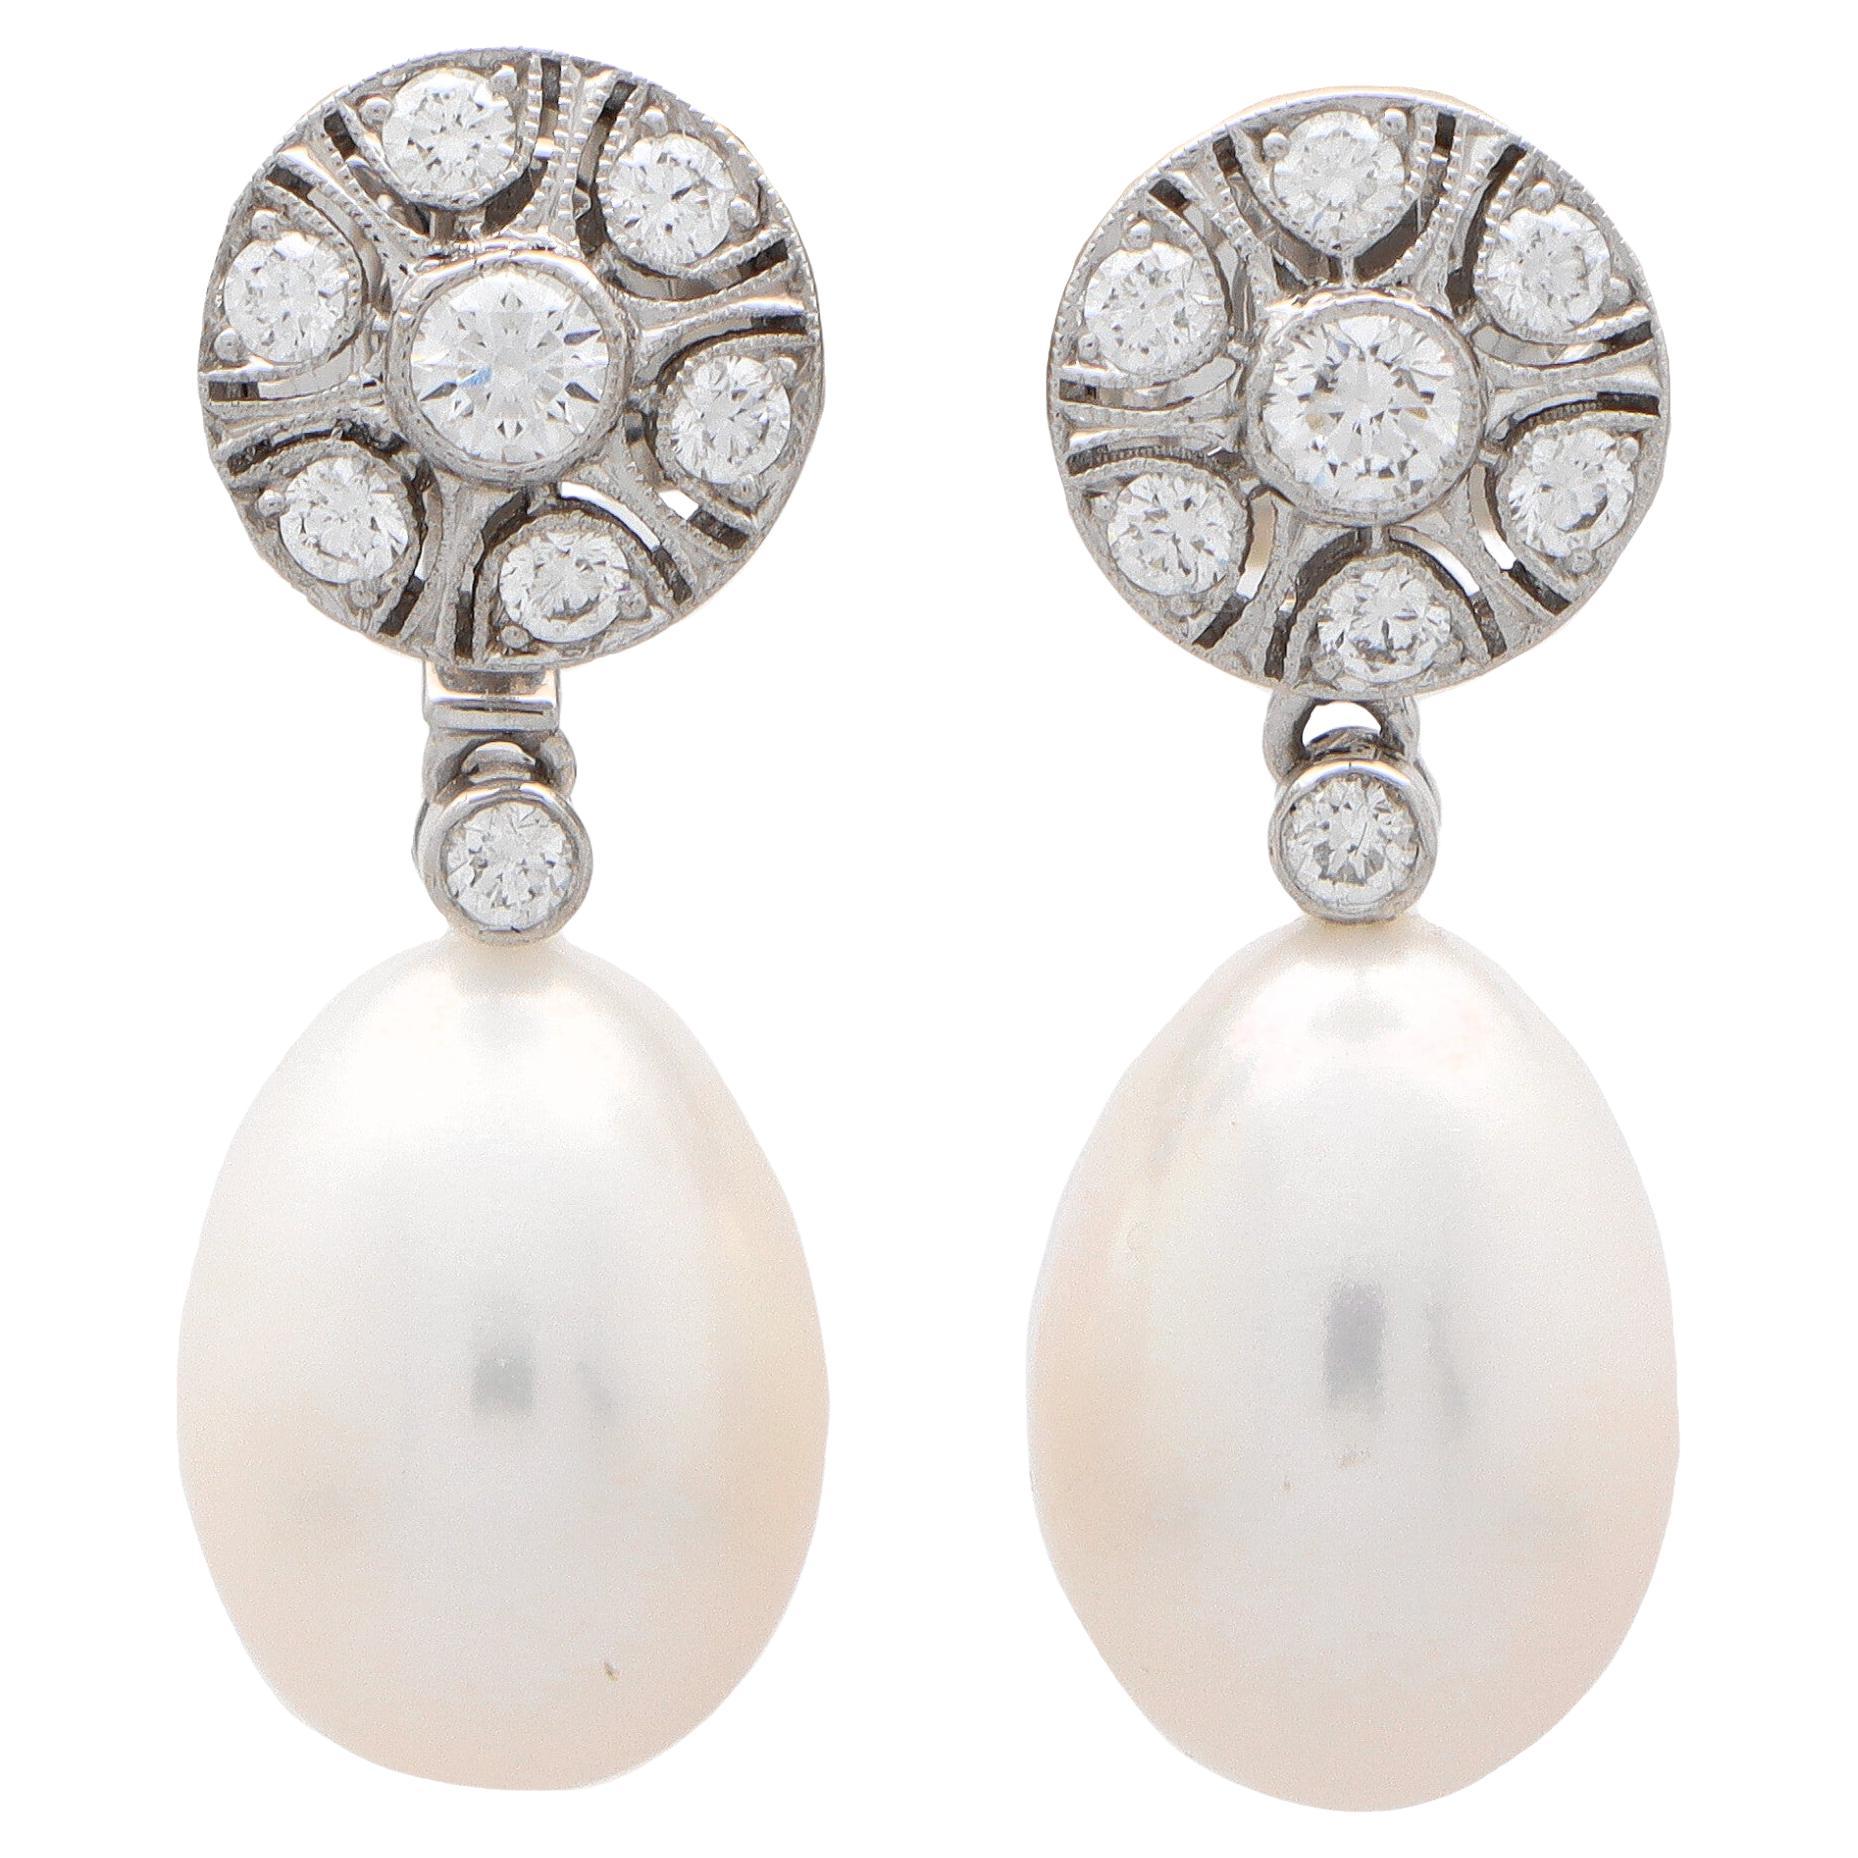 Convertible Pearl and Diamond Drop Stud Earrings Set in 18k White Gold